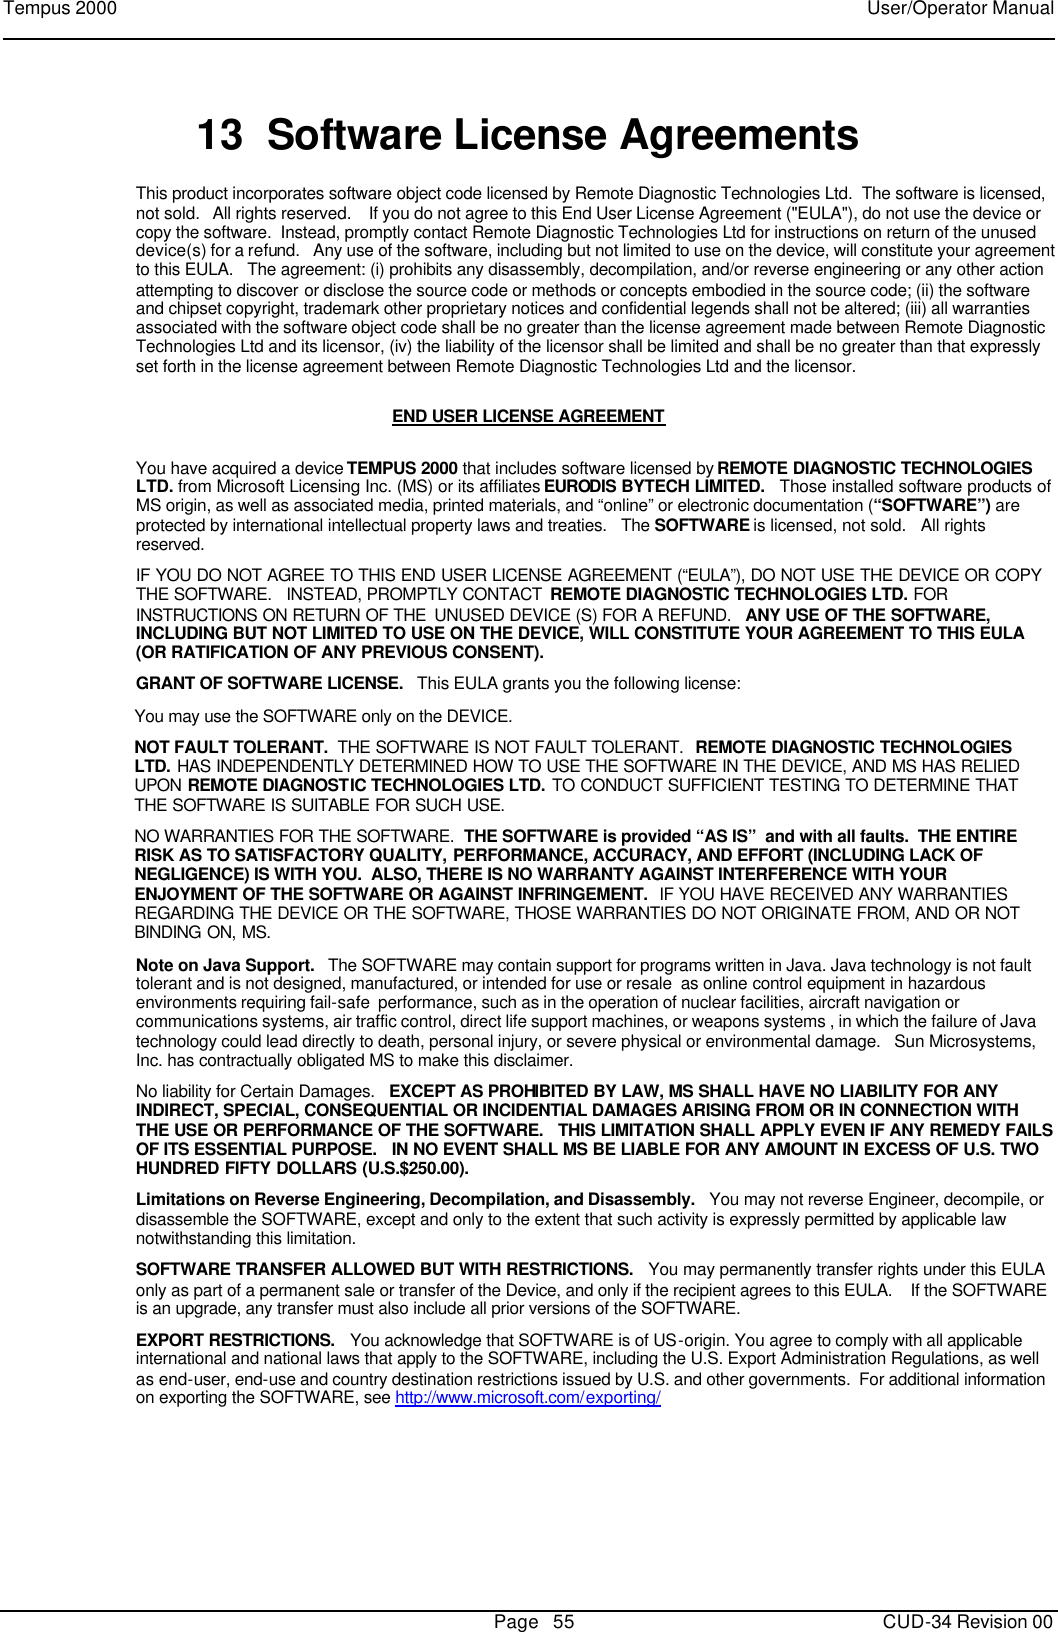 Tempus 2000    User/Operator Manual       Page   55   CUD-34 Revision 00 13 Software License Agreements This product incorporates software object code licensed by Remote Diagnostic Technologies Ltd.  The software is licensed, not sold.   All rights reserved.    If you do not agree to this End User License Agreement (&quot;EULA&quot;), do not use the device or copy the software.  Instead, promptly contact Remote Diagnostic Technologies Ltd for instructions on return of the unused device(s) for a refund.   Any use of the software, including but not limited to use on the device, will constitute your agreement to this EULA.   The agreement: (i) prohibits any disassembly, decompilation, and/or reverse engineering or any other action attempting to discover or disclose the source code or methods or concepts embodied in the source code; (ii) the software and chipset copyright, trademark other proprietary notices and confidential legends shall not be altered; (iii) all warranties associated with the software object code shall be no greater than the license agreement made between Remote Diagnostic Technologies Ltd and its licensor, (iv) the liability of the licensor shall be limited and shall be no greater than that expressly set forth in the license agreement between Remote Diagnostic Technologies Ltd and the licensor.  END USER LICENSE AGREEMENT  You have acquired a device TEMPUS 2000 that includes software licensed by REMOTE DIAGNOSTIC TECHNOLOGIES LTD. from Microsoft Licensing Inc. (MS) or its affiliates EURODIS BYTECH LIMITED.   Those installed software products of MS origin, as well as associated media, printed materials, and “online” or electronic documentation (“SOFTWARE”) are protected by international intellectual property laws and treaties.   The SOFTWARE is licensed, not sold.   All rights reserved. IF YOU DO NOT AGREE TO THIS END USER LICENSE AGREEMENT (“EULA”), DO NOT USE THE DEVICE OR COPY THE SOFTWARE.   INSTEAD, PROMPTLY CONTACT  REMOTE DIAGNOSTIC TECHNOLOGIES LTD. FOR INSTRUCTIONS ON RETURN OF THE  UNUSED DEVICE (S) FOR A REFUND.   ANY USE OF THE SOFTWARE, INCLUDING BUT NOT LIMITED TO USE ON THE DEVICE, WILL CONSTITUTE YOUR AGREEMENT TO THIS EULA (OR RATIFICATION OF ANY PREVIOUS CONSENT). GRANT OF SOFTWARE LICENSE.   This EULA grants you the following license: You may use the SOFTWARE only on the DEVICE. NOT FAULT TOLERANT.  THE SOFTWARE IS NOT FAULT TOLERANT.  REMOTE DIAGNOSTIC TECHNOLOGIES LTD. HAS INDEPENDENTLY DETERMINED HOW TO USE THE SOFTWARE IN THE DEVICE, AND MS HAS RELIED UPON  REMOTE DIAGNOSTIC TECHNOLOGIES LTD. TO CONDUCT SUFFICIENT TESTING TO DETERMINE THAT THE SOFTWARE IS SUITABLE FOR SUCH USE. NO WARRANTIES FOR THE SOFTWARE.  THE SOFTWARE is provided “AS IS”  and with all faults.  THE ENTIRE RISK AS TO SATISFACTORY QUALITY,  PERFORMANCE, ACCURACY, AND EFFORT (INCLUDING LACK OF NEGLIGENCE) IS WITH YOU.  ALSO, THERE IS NO WARRANTY AGAINST INTERFERENCE WITH YOUR ENJOYMENT OF THE SOFTWARE OR AGAINST INFRINGEMENT.  IF YOU HAVE RECEIVED ANY WARRANTIES REGARDING THE DEVICE OR THE SOFTWARE, THOSE WARRANTIES DO NOT ORIGINATE FROM, AND OR NOT BINDING ON, MS. Note on Java Support.   The SOFTWARE may contain support for programs written in Java. Java technology is not fault tolerant and is not designed, manufactured, or intended for use or resale  as online control equipment in hazardous environments requiring fail-safe  performance, such as in the operation of nuclear facilities, aircraft navigation or communications systems, air traffic control, direct life support machines, or weapons systems , in which the failure of Java technology could lead directly to death, personal injury, or severe physical or environmental damage.   Sun Microsystems, Inc. has contractually obligated MS to make this disclaimer. No liability for Certain Damages.   EXCEPT AS PROHIBITED BY LAW, MS SHALL HAVE NO LIABILITY FOR ANY INDIRECT, SPECIAL, CONSEQUENTIAL OR INCIDENTIAL DAMAGES ARISING FROM OR IN CONNECTION WITH THE USE OR PERFORMANCE OF THE SOFTWARE.   THIS LIMITATION SHALL APPLY EVEN IF ANY REMEDY FAILS OF ITS ESSENTIAL PURPOSE.   IN NO EVENT SHALL MS BE LIABLE FOR ANY AMOUNT IN EXCESS OF U.S. TWO HUNDRED FIFTY DOLLARS (U.S.$250.00). Limitations on Reverse Engineering, Decompilation, and Disassembly.   You may not reverse Engineer, decompile, or disassemble the SOFTWARE, except and only to the extent that such activity is expressly permitted by applicable law notwithstanding this limitation. SOFTWARE TRANSFER ALLOWED BUT WITH RESTRICTIONS.   You may permanently transfer rights under this EULA only as part of a permanent sale or transfer of the Device, and only if the recipient agrees to this EULA.    If the SOFTWARE is an upgrade, any transfer must also include all prior versions of the SOFTWARE. EXPORT RESTRICTIONS.   You acknowledge that SOFTWARE is of US-origin. You agree to comply with all applicable international and national laws that apply to the SOFTWARE, including the U.S. Export Administration Regulations, as well as end-user, end-use and country destination restrictions issued by U.S. and other governments.  For additional information on exporting the SOFTWARE, see http://www.microsoft.com/exporting/   